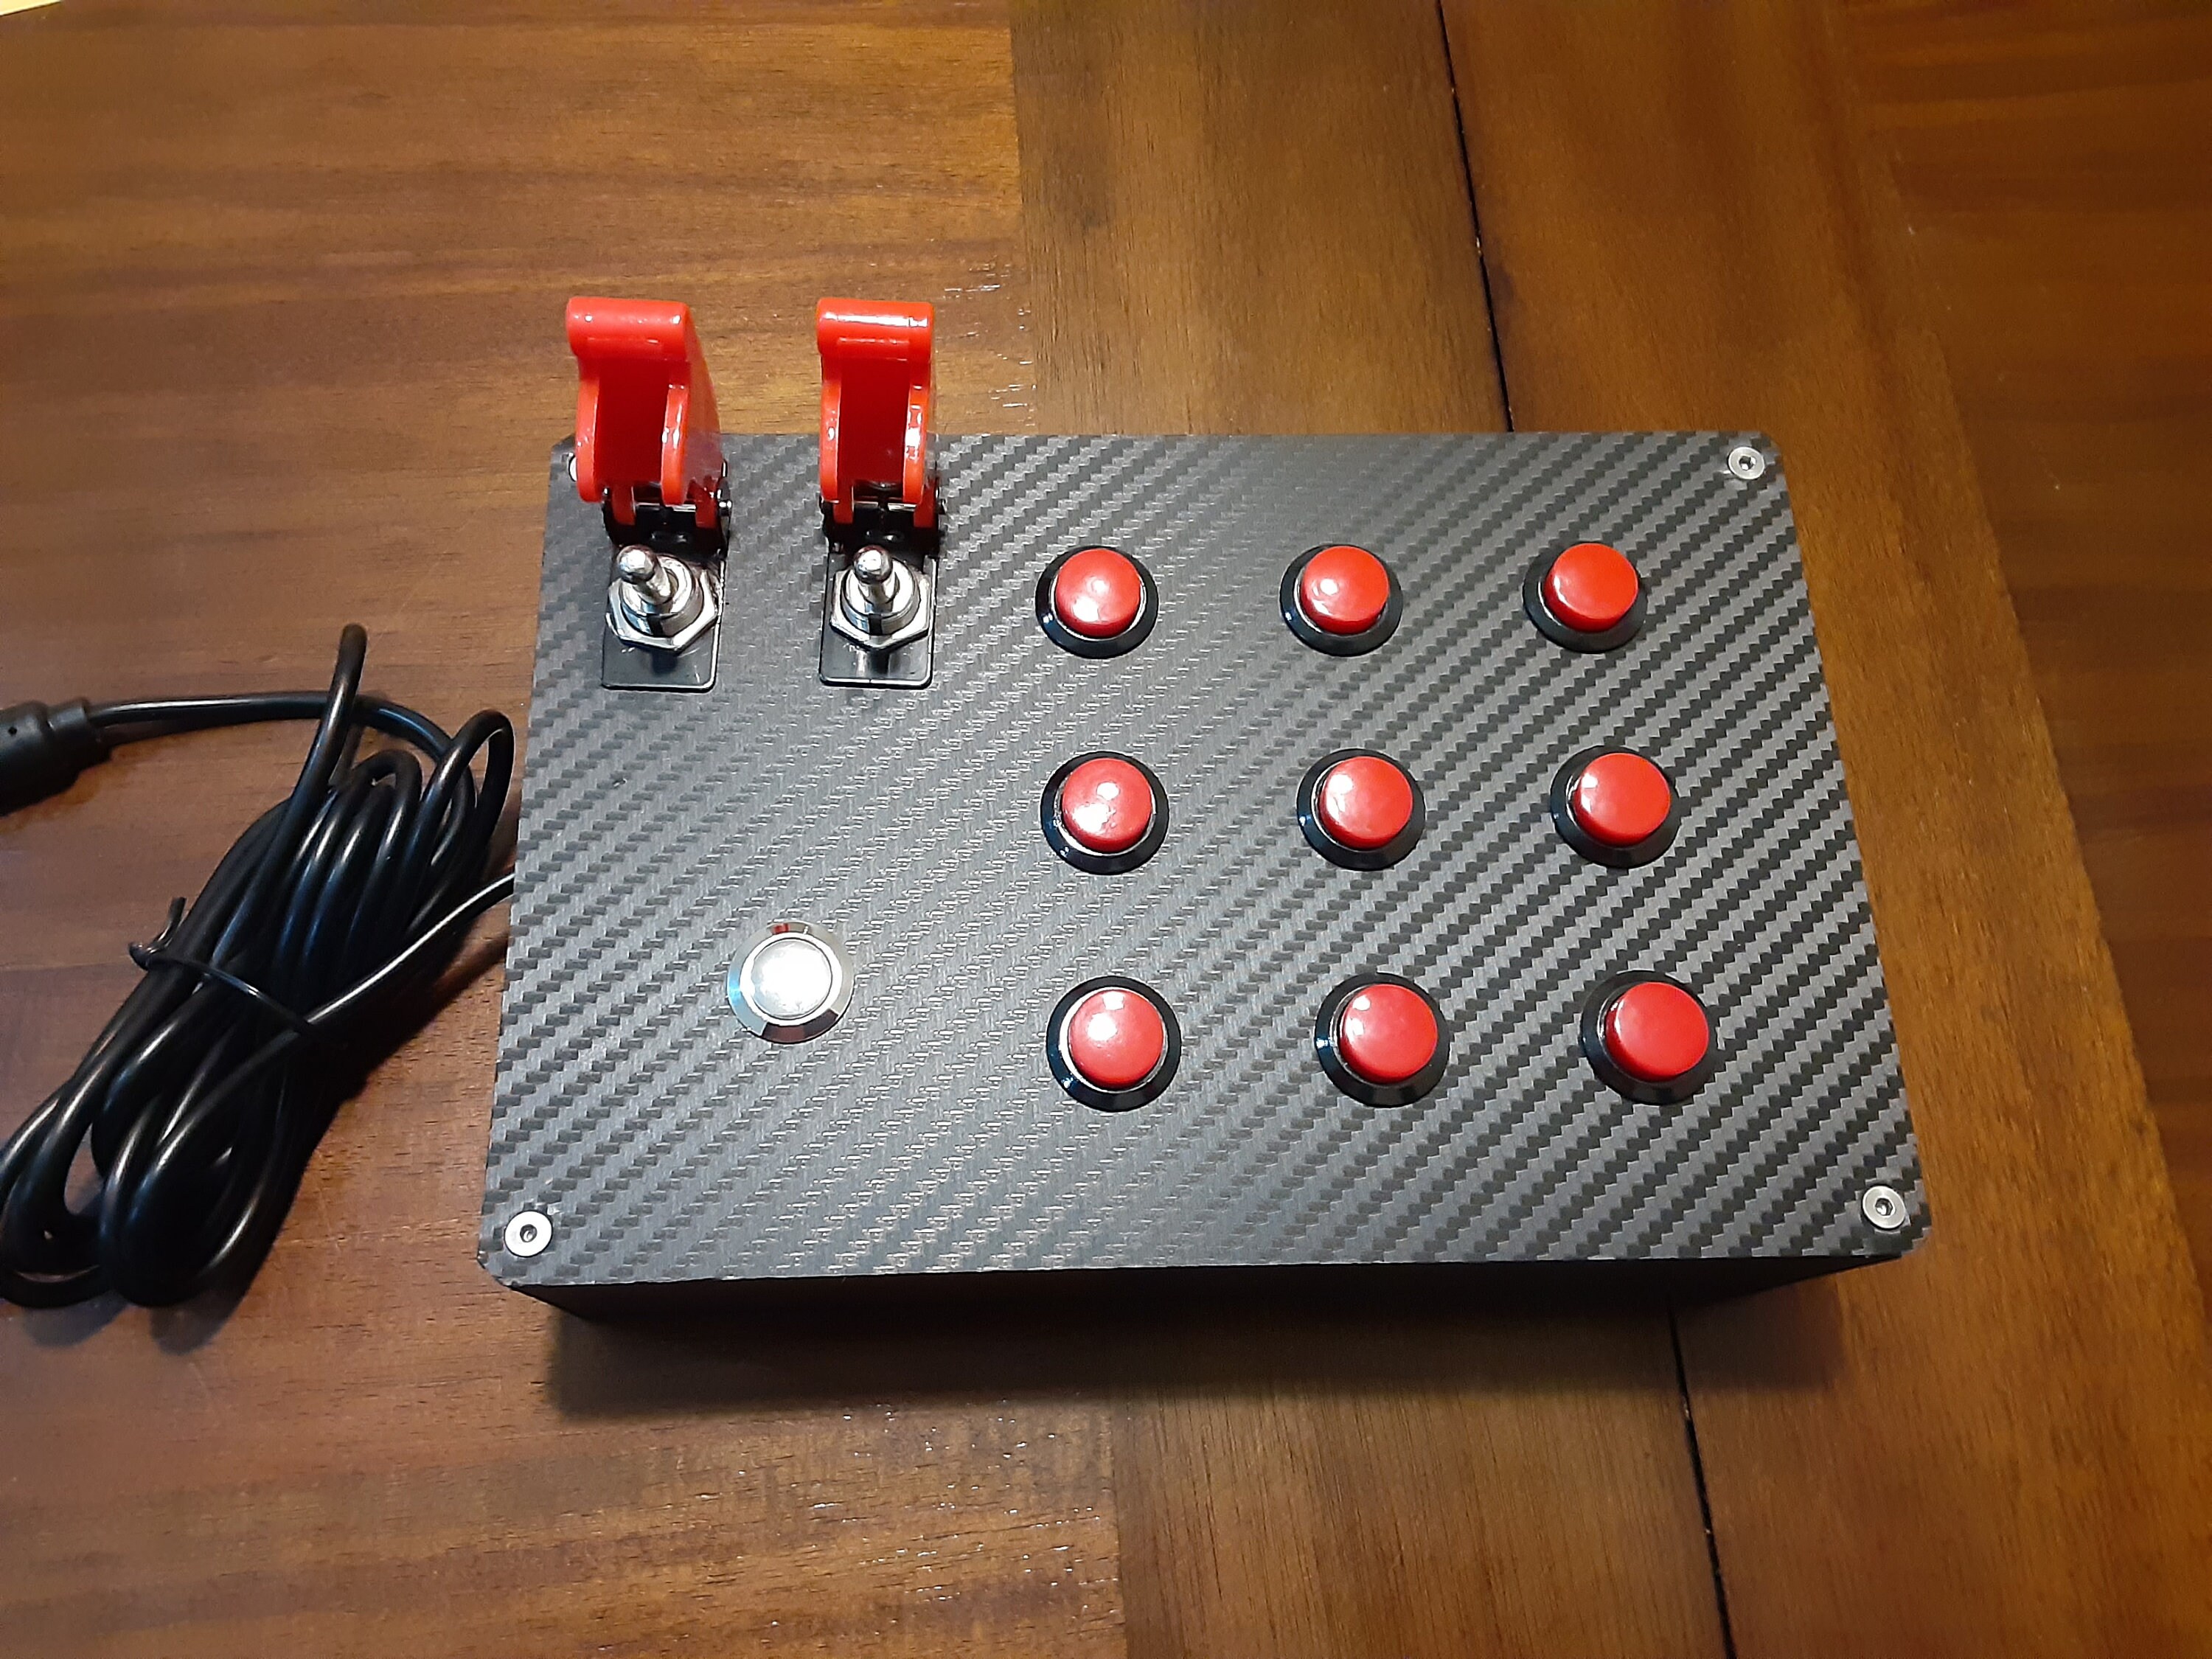 USB button box for sim racing or trucking sim with 12 buttons - truck style  - and 3d printed table mount